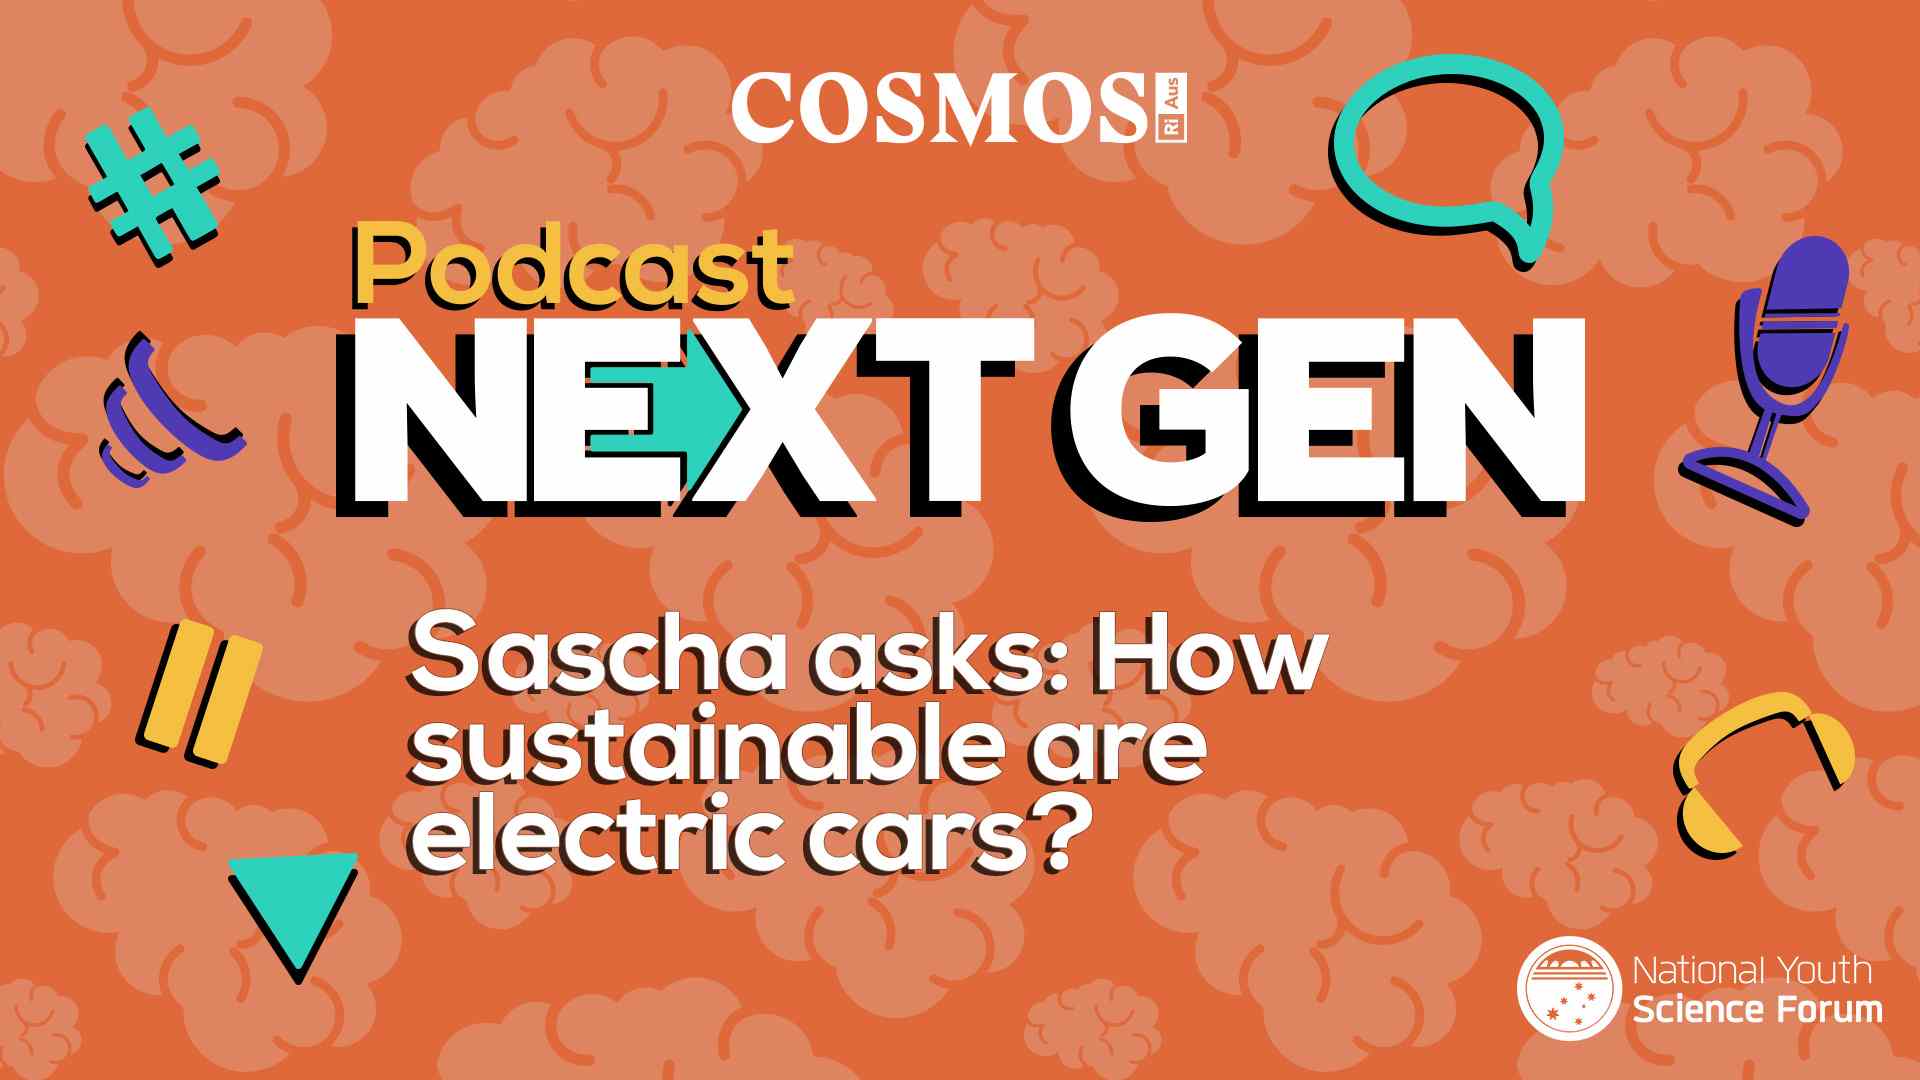 PODCAST NEXT GEN: How sustainable are electric cars?